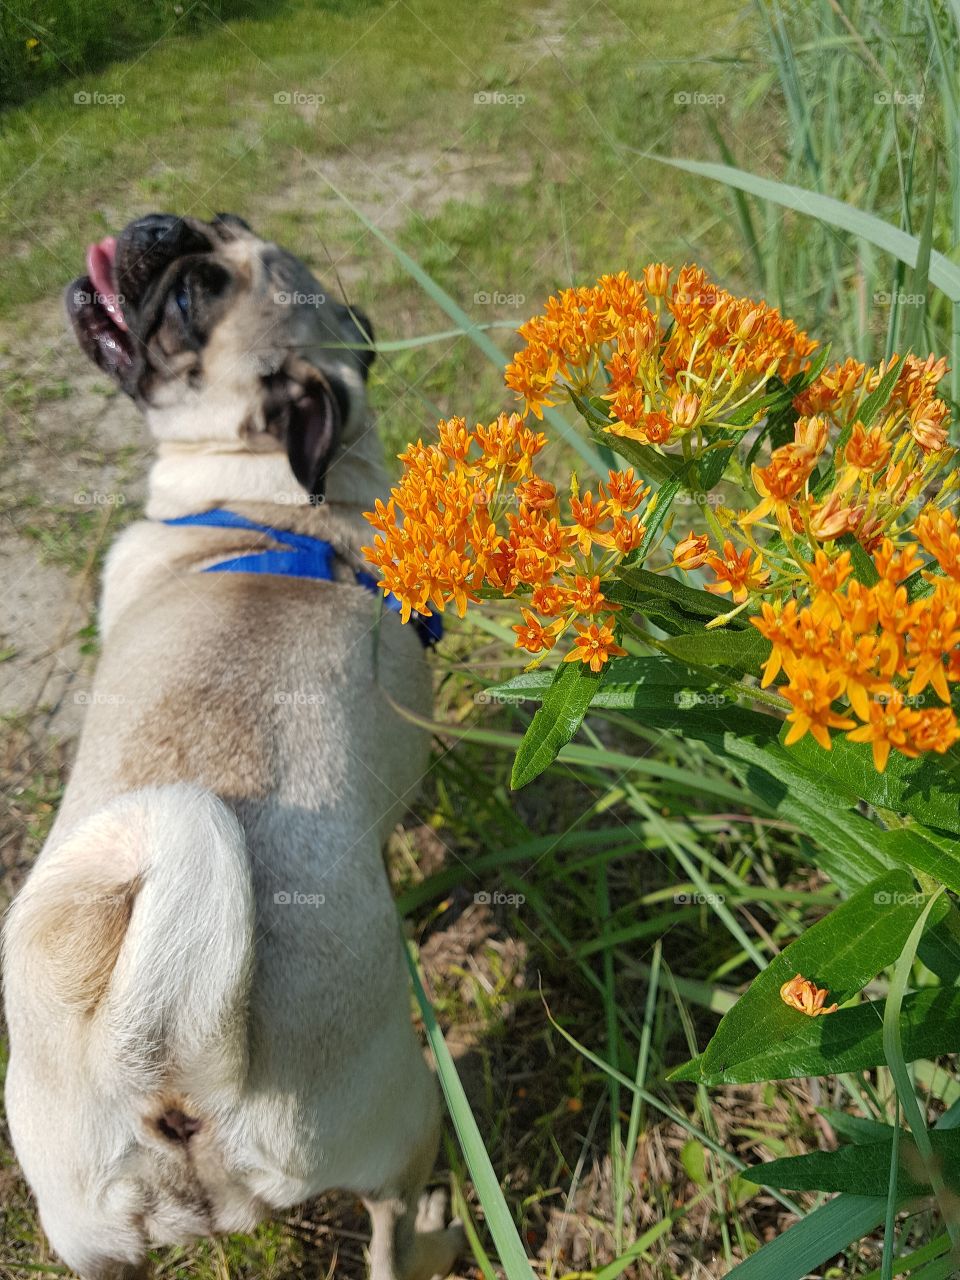 A pug pants in the morning sun. Posing next to wild orange flowers.